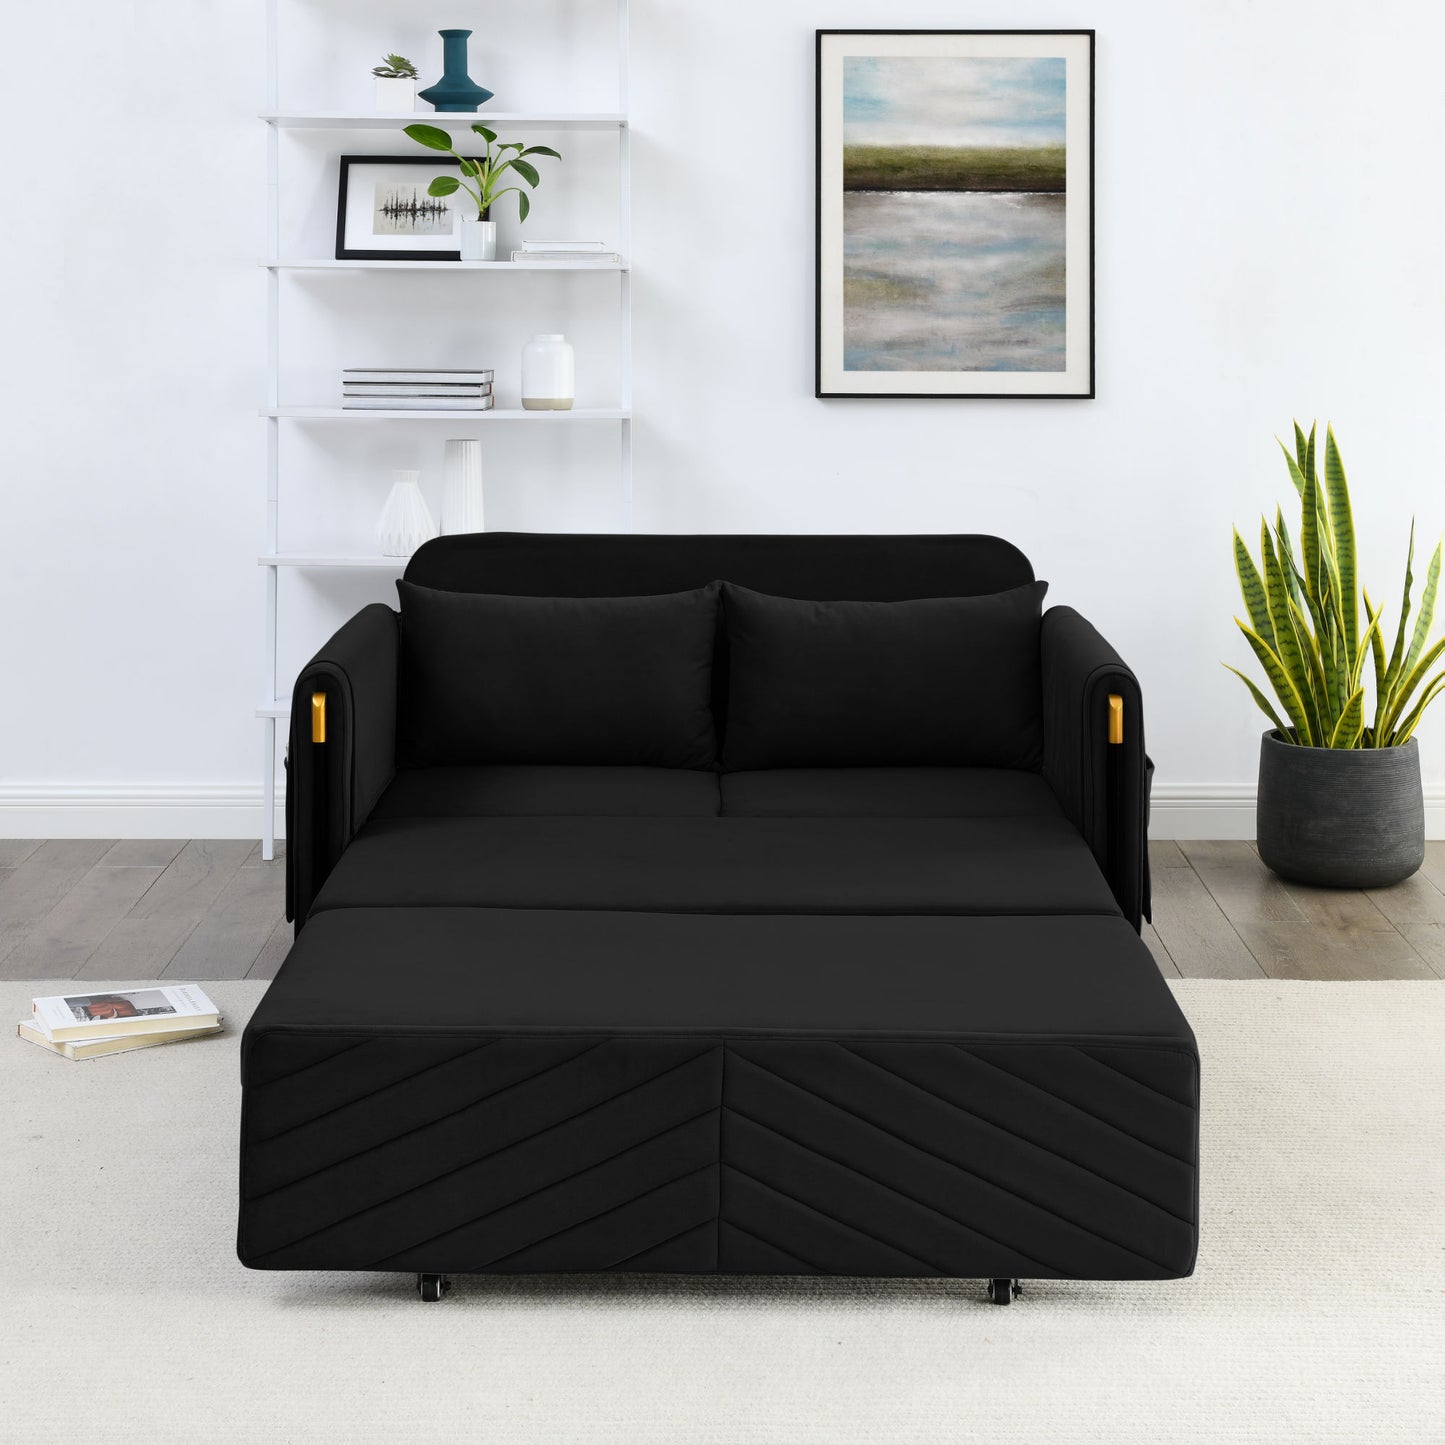 MH 54" Modern Convertible Sofa Bed with 2 Detachable Arm Pockets, Velvet Loveseat Sofa with Pull Out Bed, 2 Pillows and Living Room Adjustable Backrest, Grid Design Armrests, Black